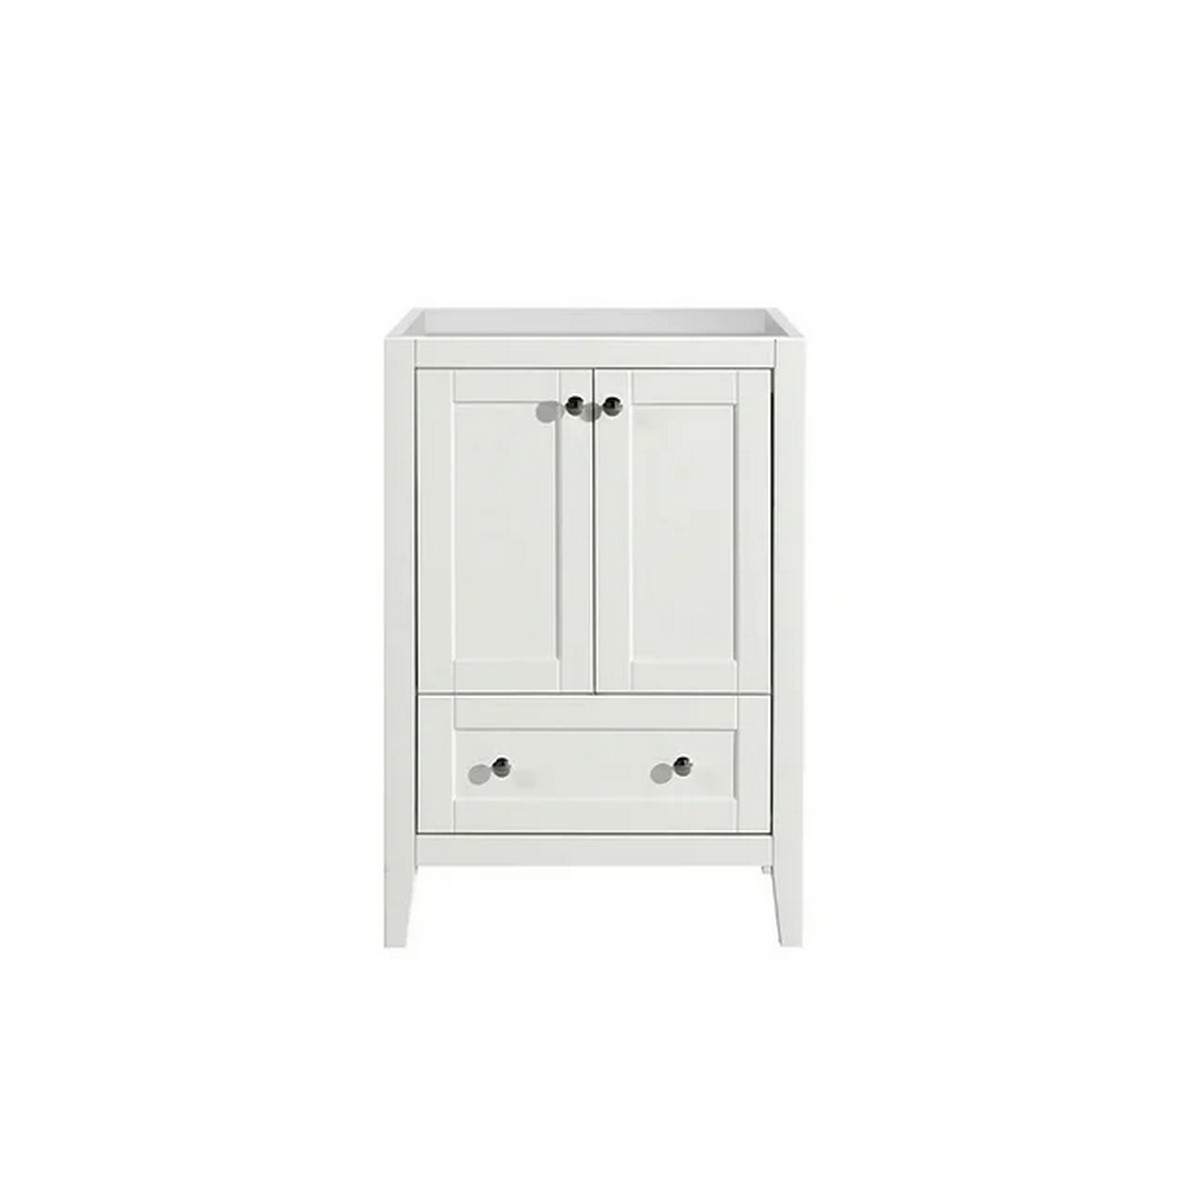 SWISS MADISON SM-BV412-C CANNES 24 INCH FREESTANDING SINGLE SINK BATHROOM VANITY CABINET ONLY IN WHITE